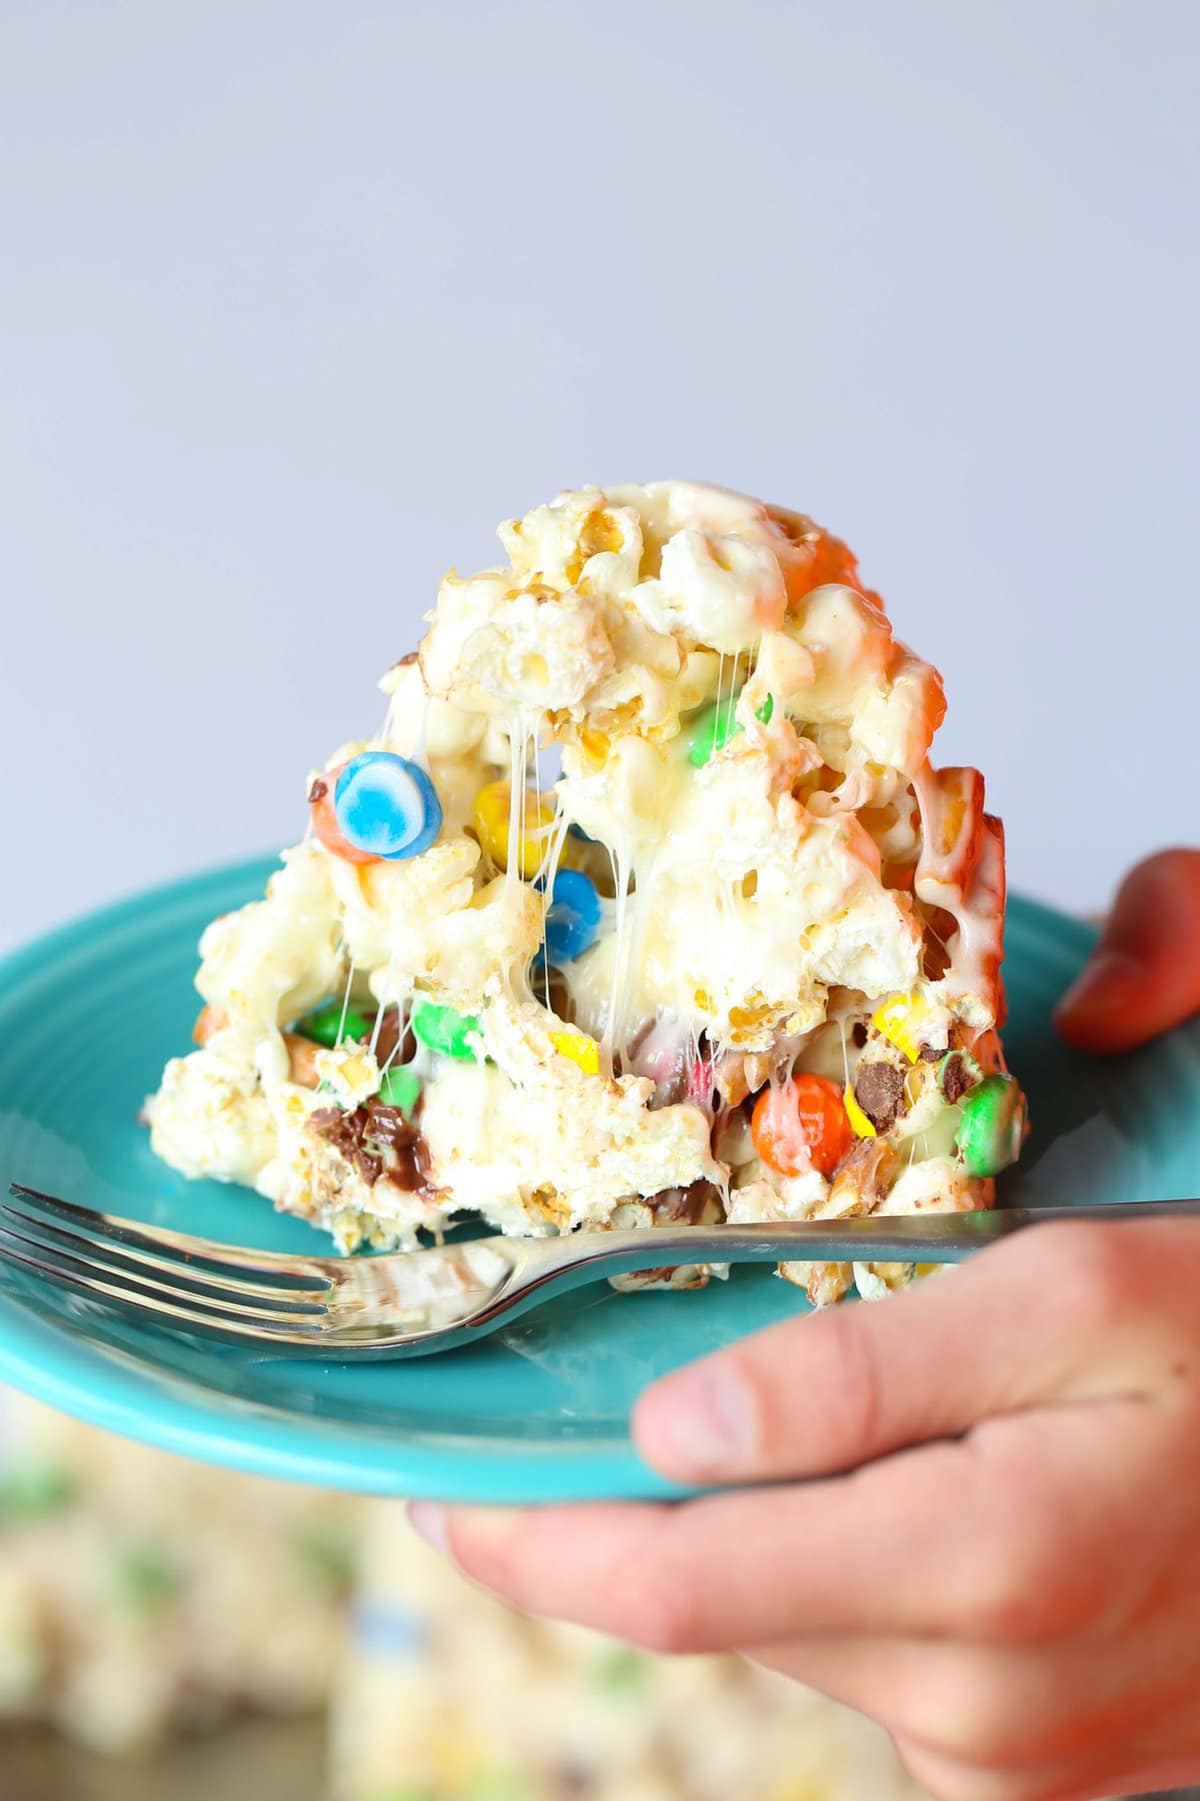 This Popcorn Cake is chewy, gooey, sweet and totally over the top! It's such a simple and fun alternative for a party cake!